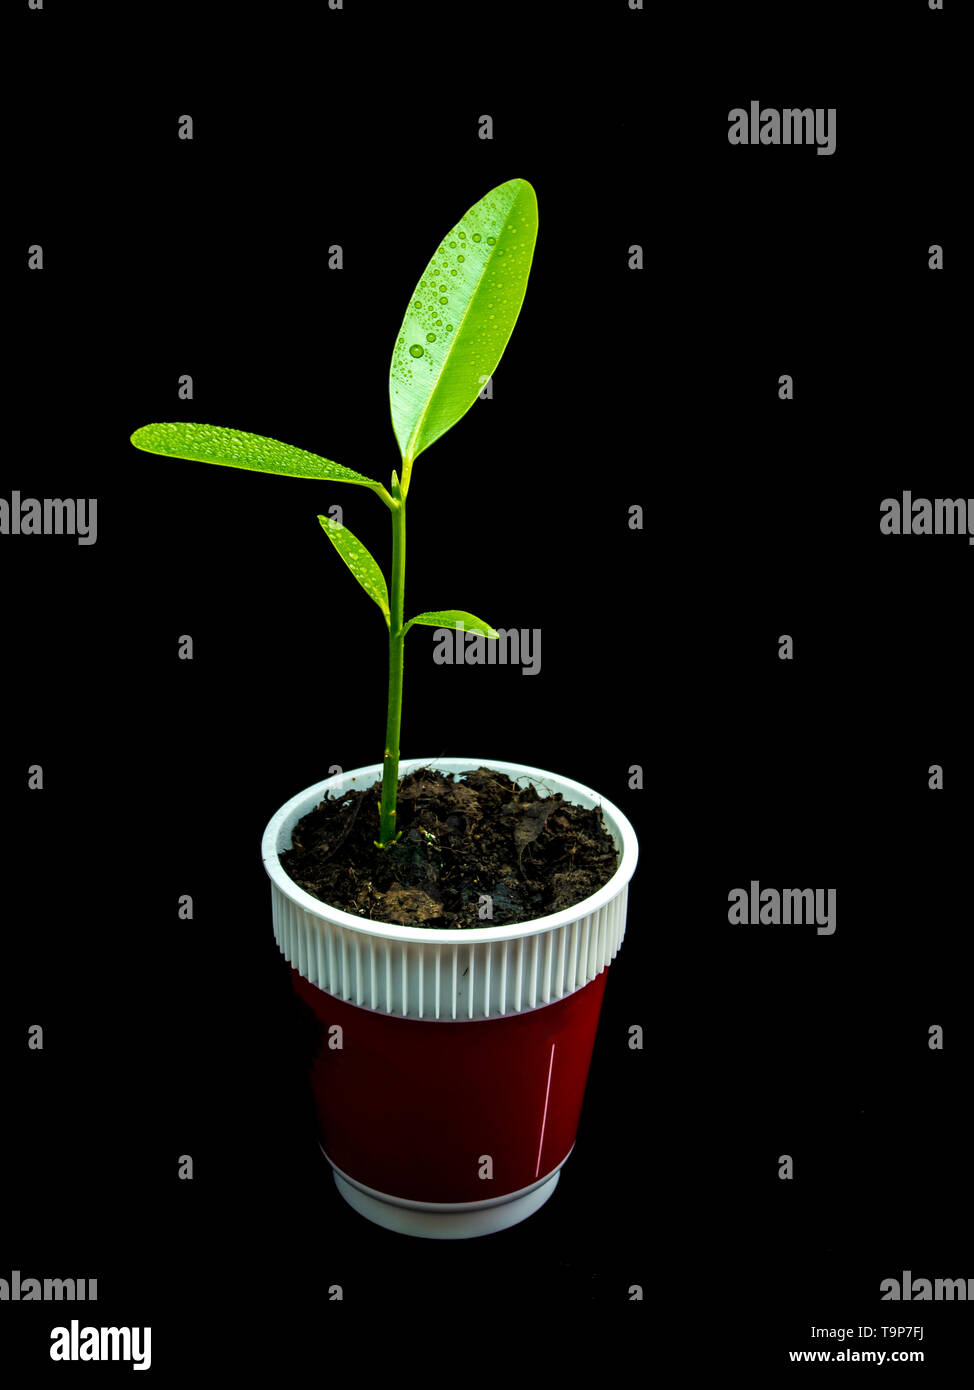 Bud leaves of young plant seeding in black background Stock Photo